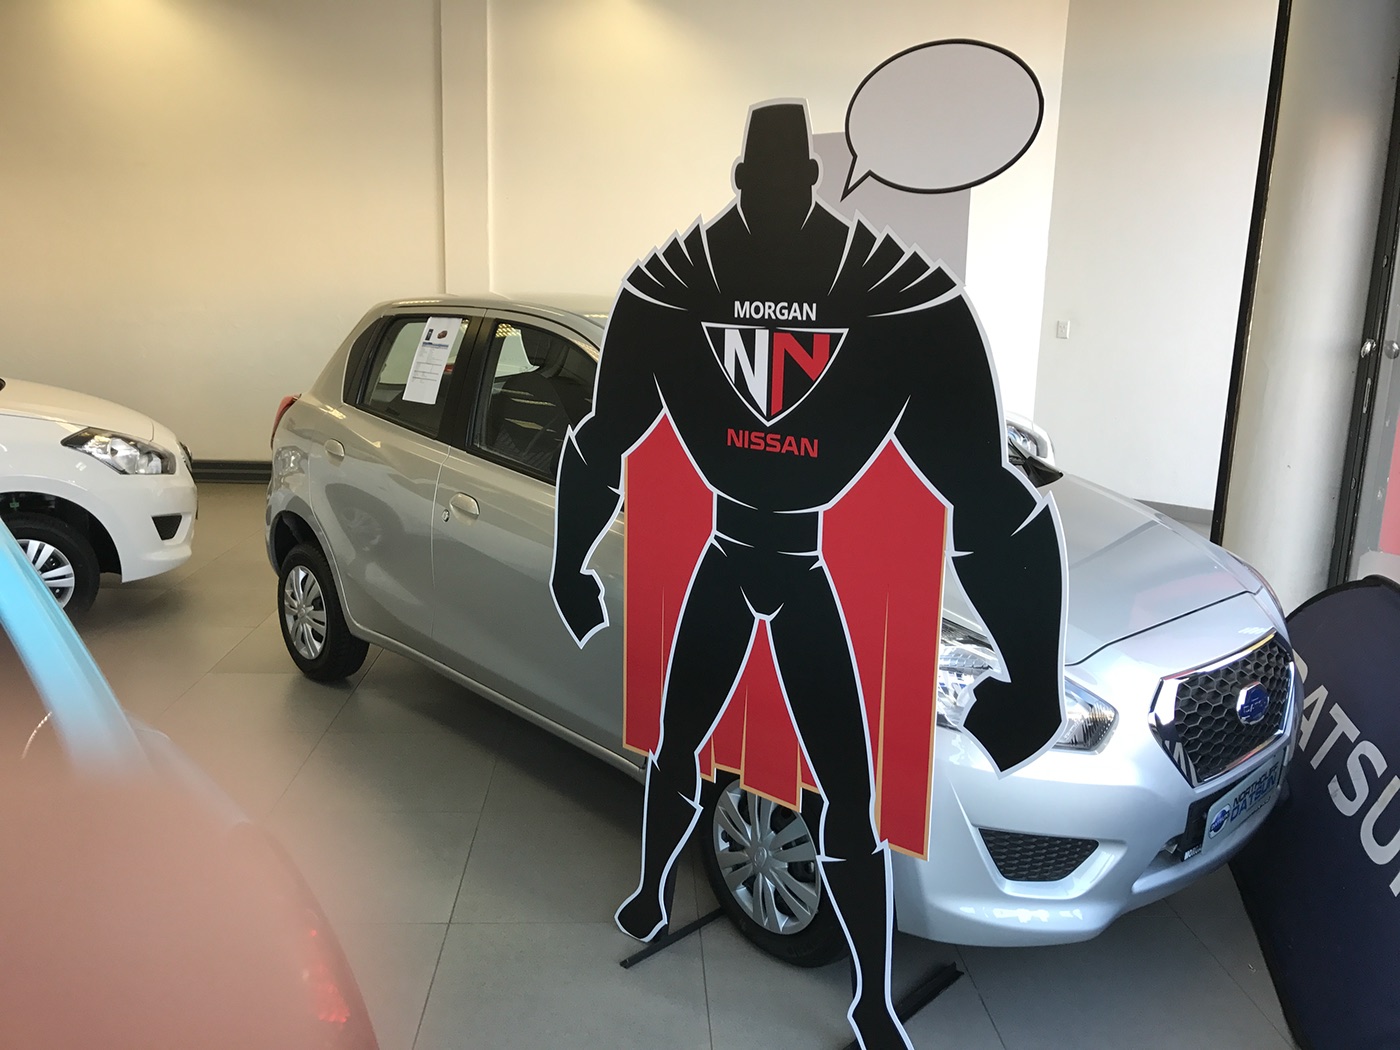 Standee life size SuperHero dealership branding cut outs